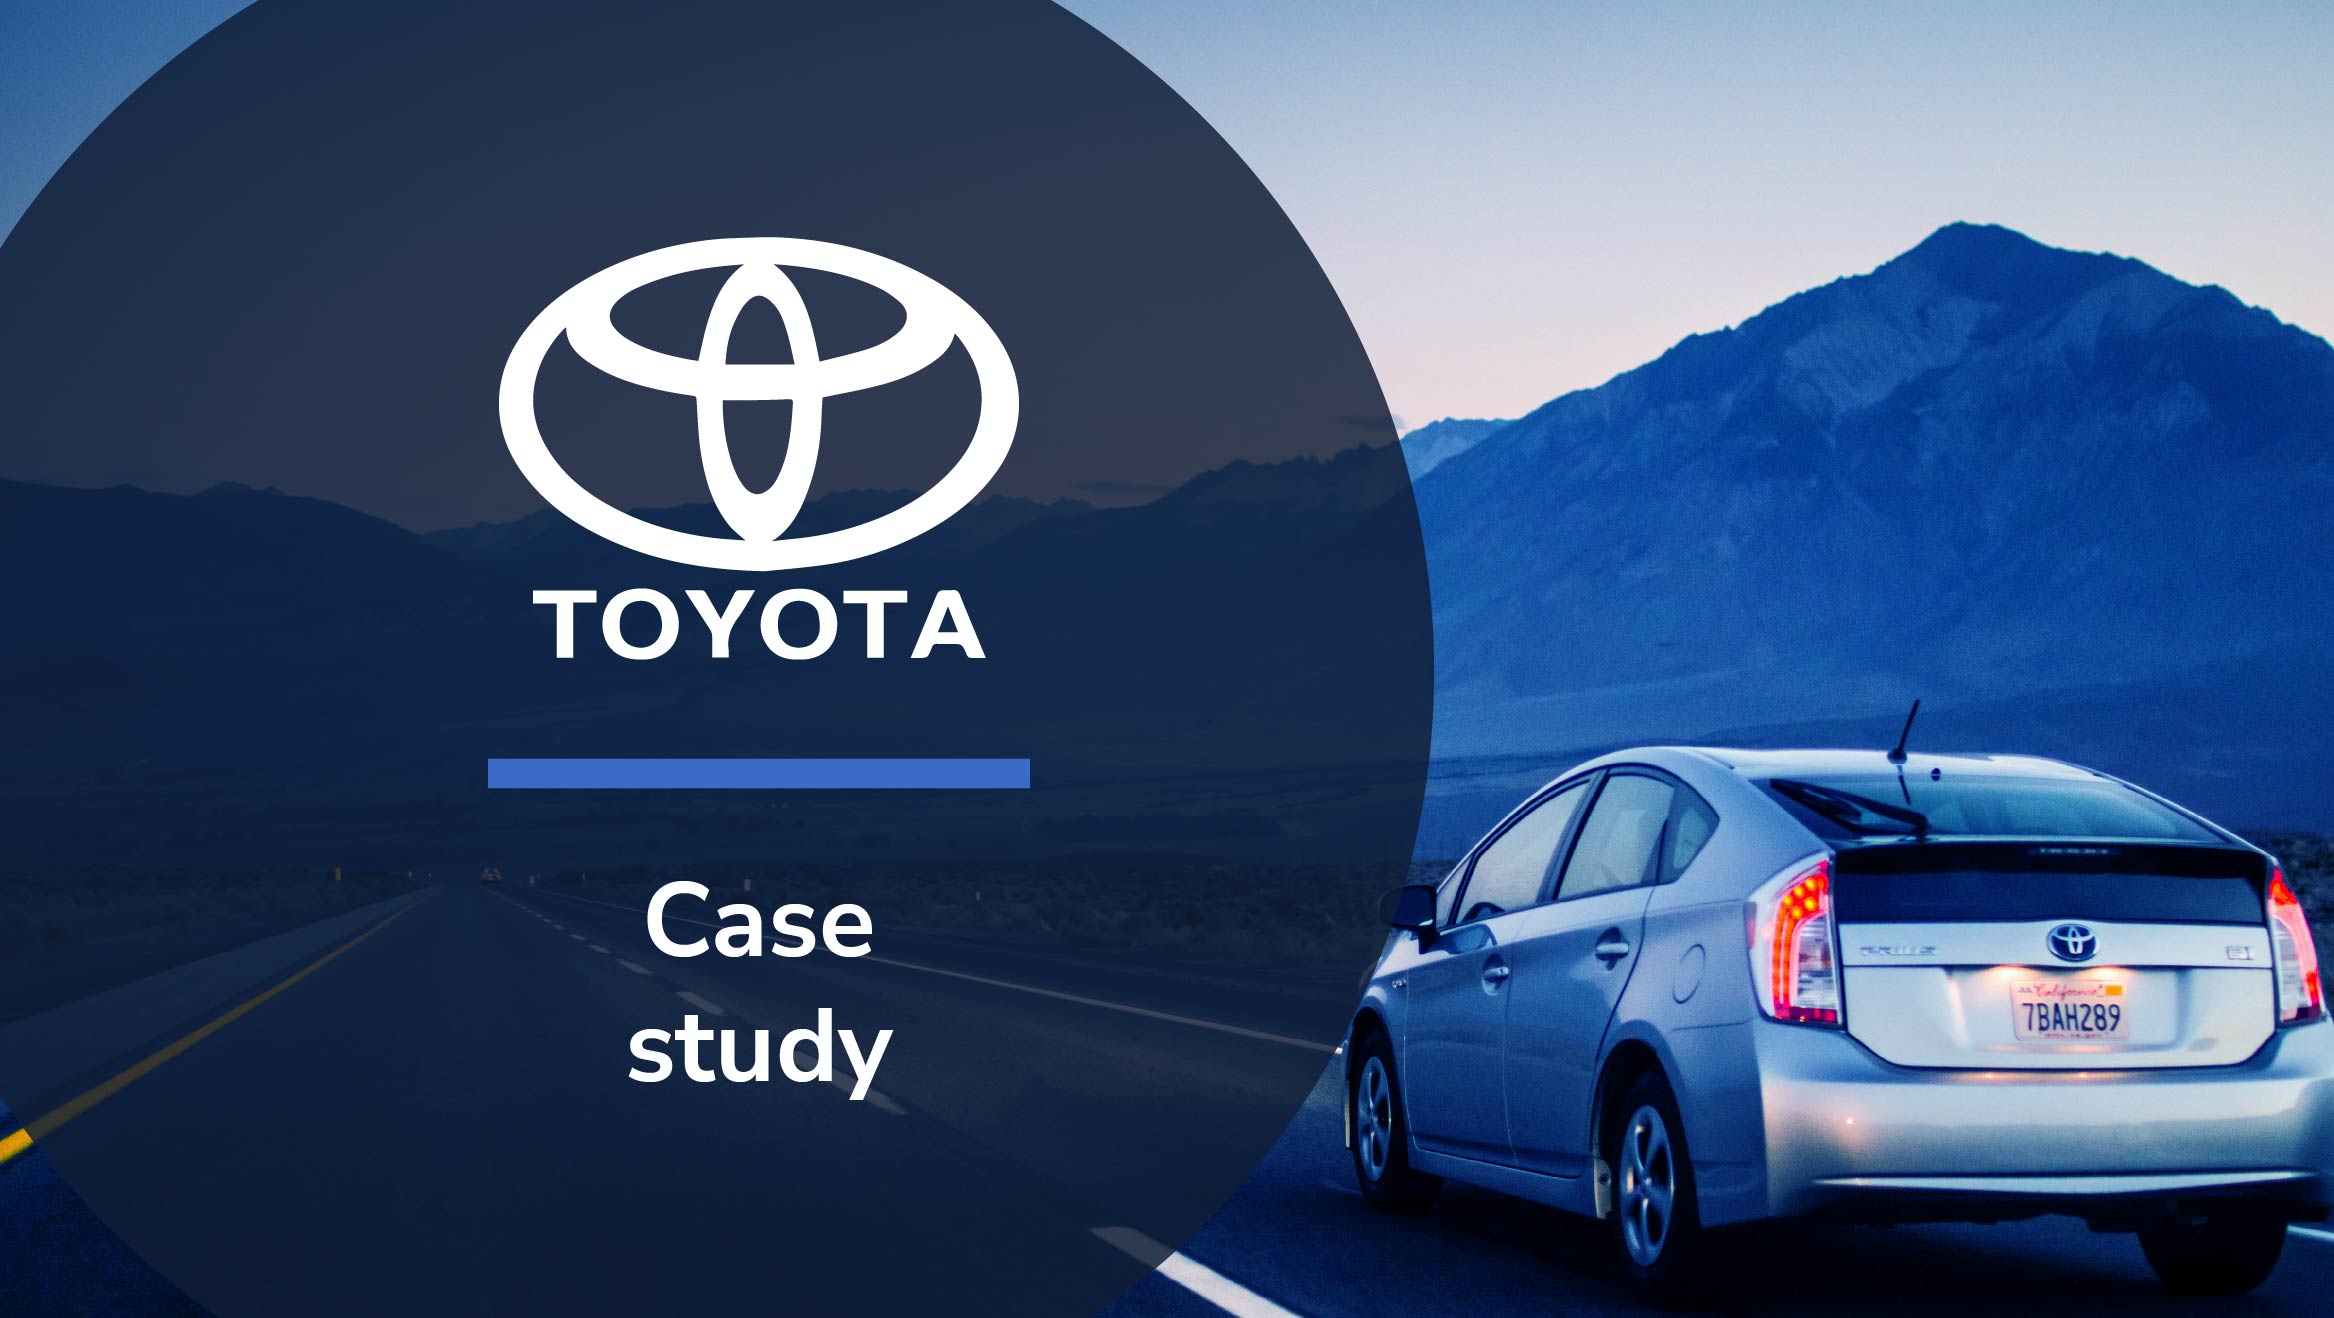 Toyota case: the power of reinvention